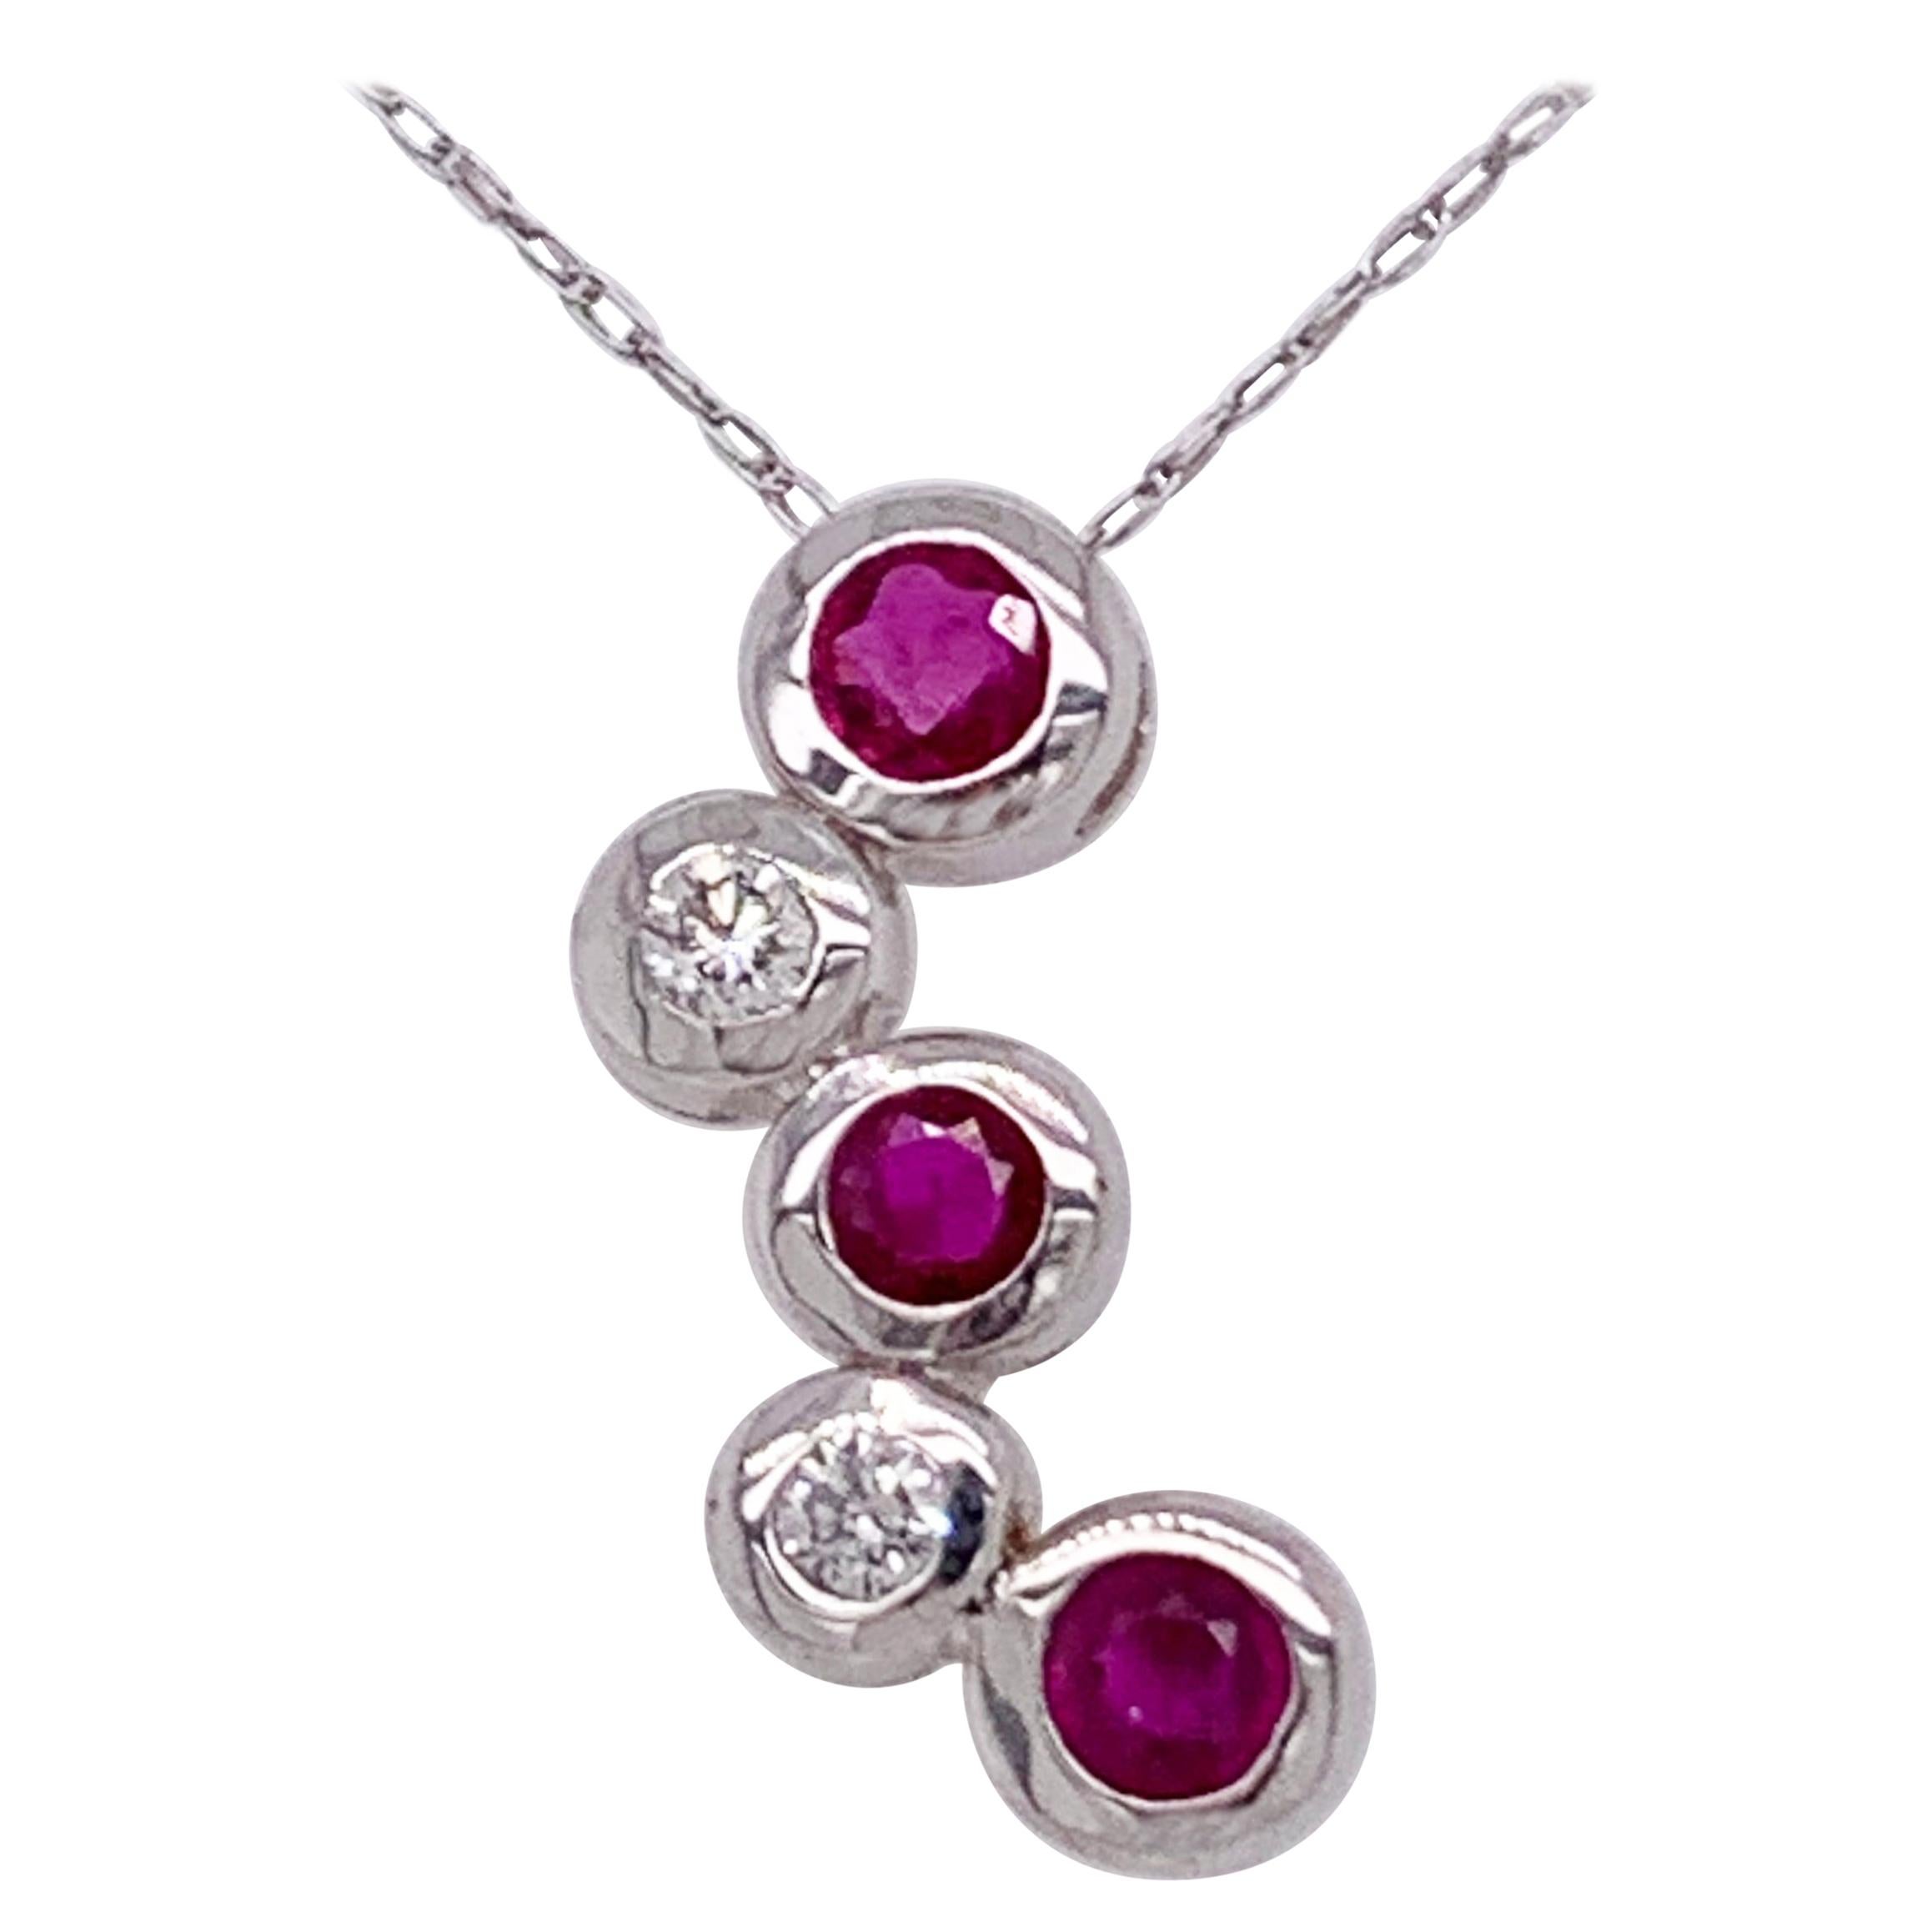 14kt Gold Ruby and Diamond Necklace Having 3 Rubies and 2 Round Diamonds For Sale